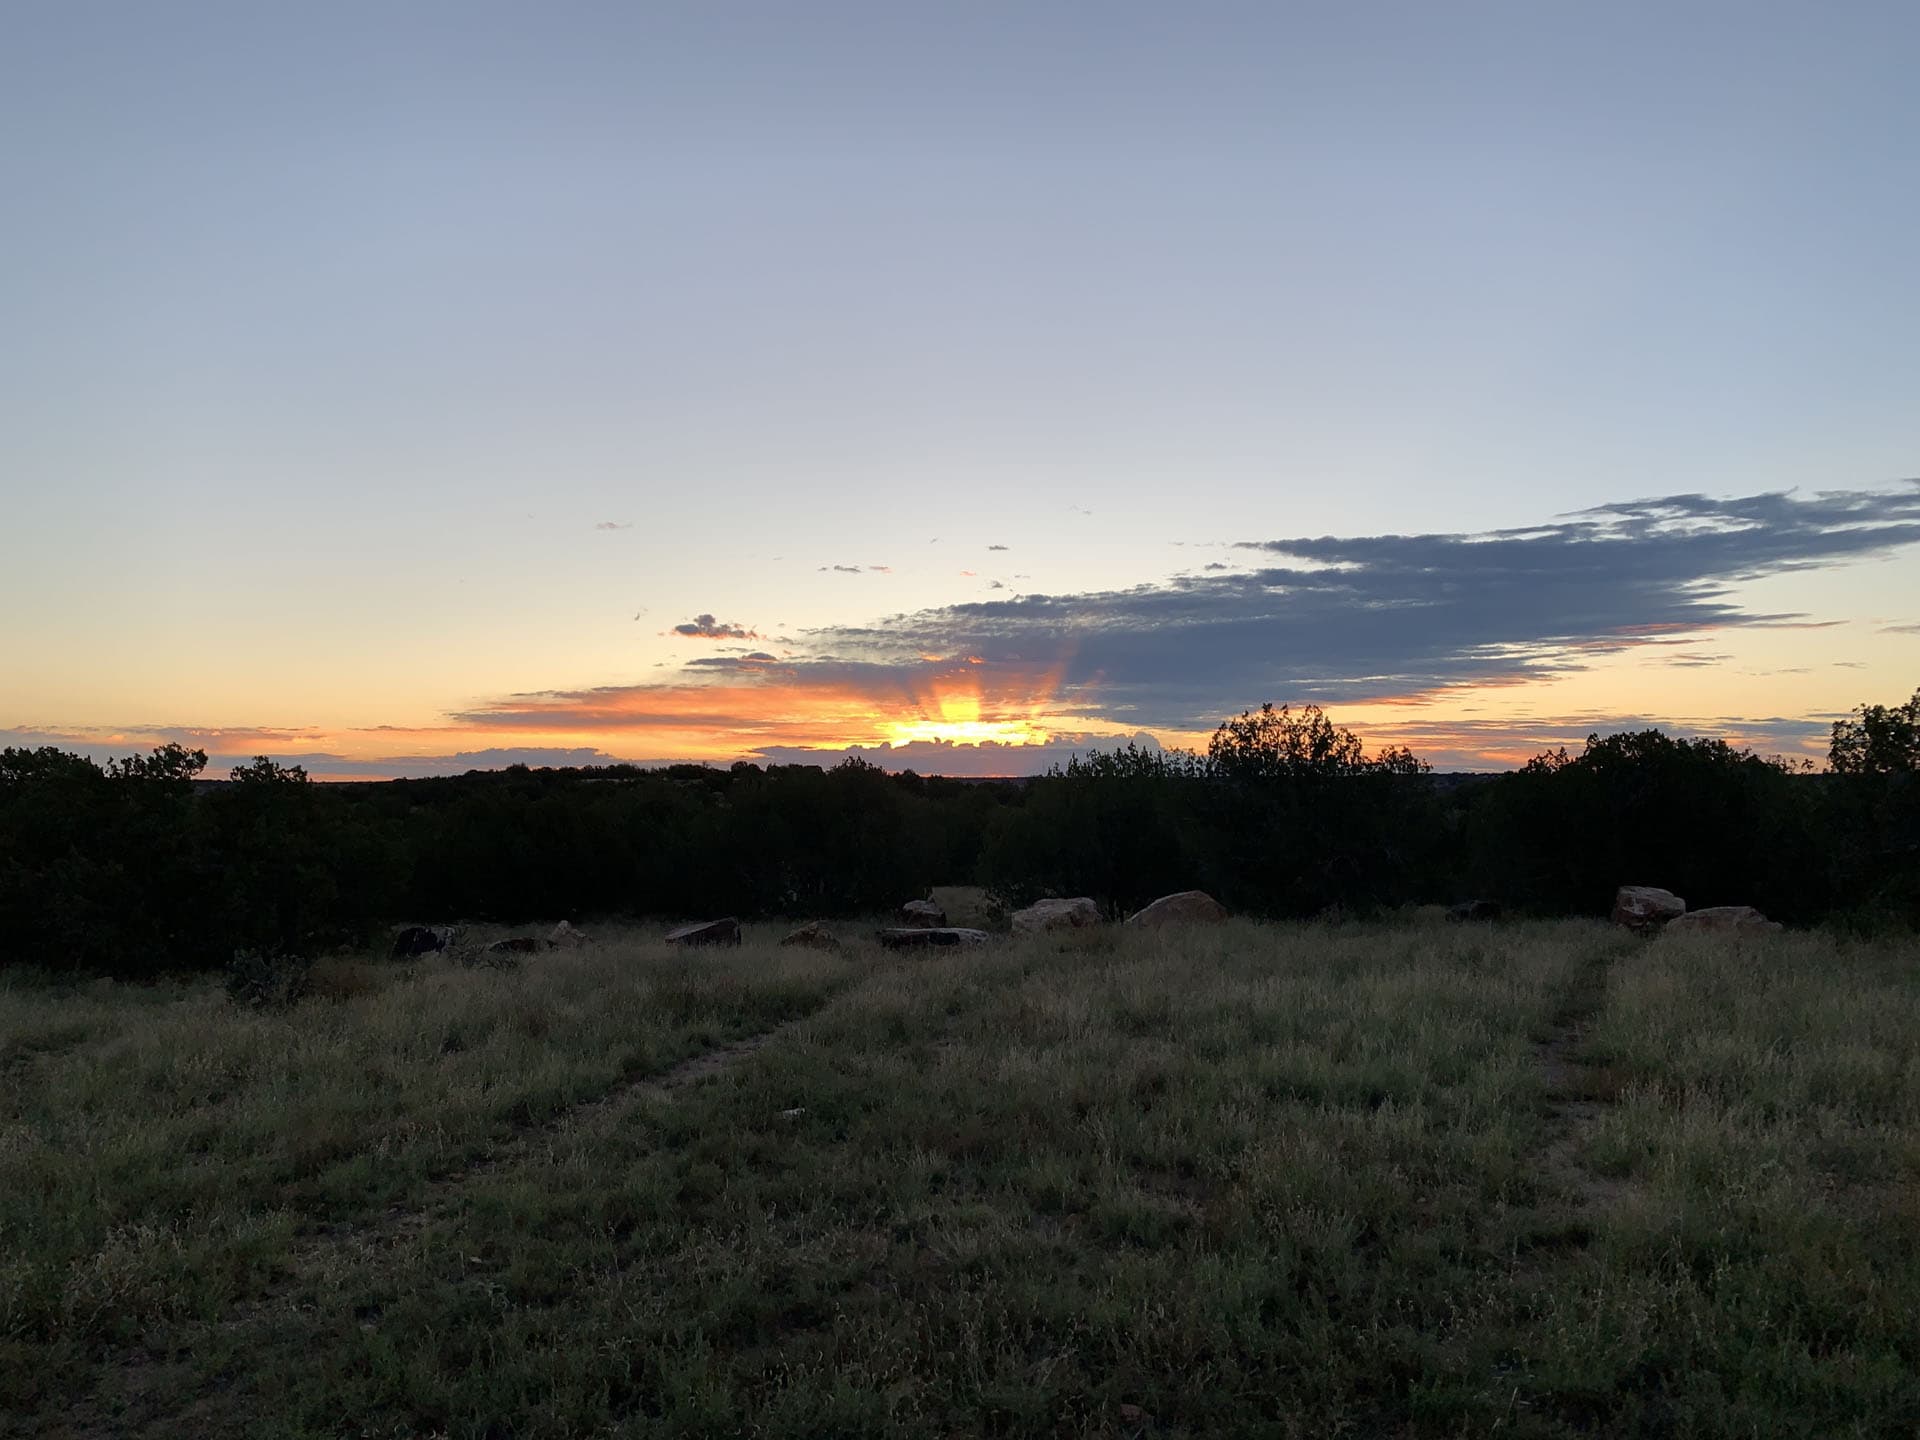 The sun is rising over the grassy field at Comanche National Grasslands.